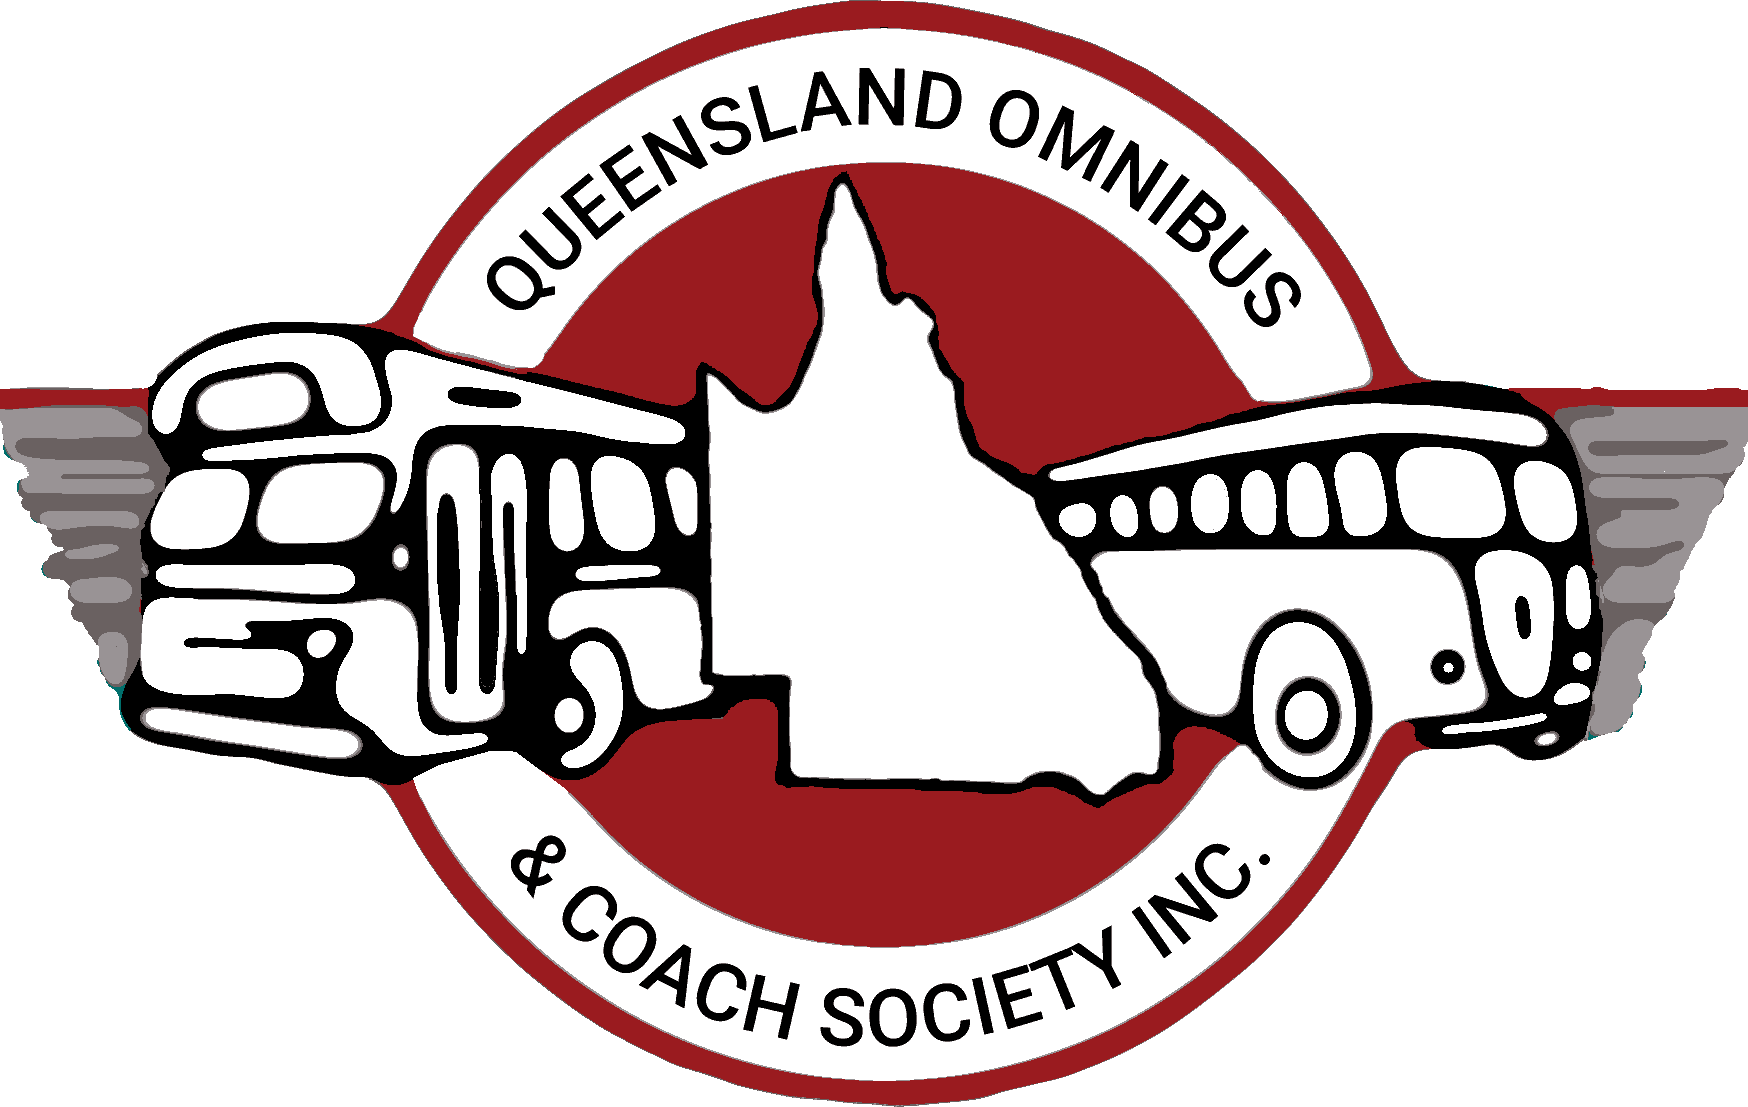 Queensland Omnibus and Coach Society Inc.